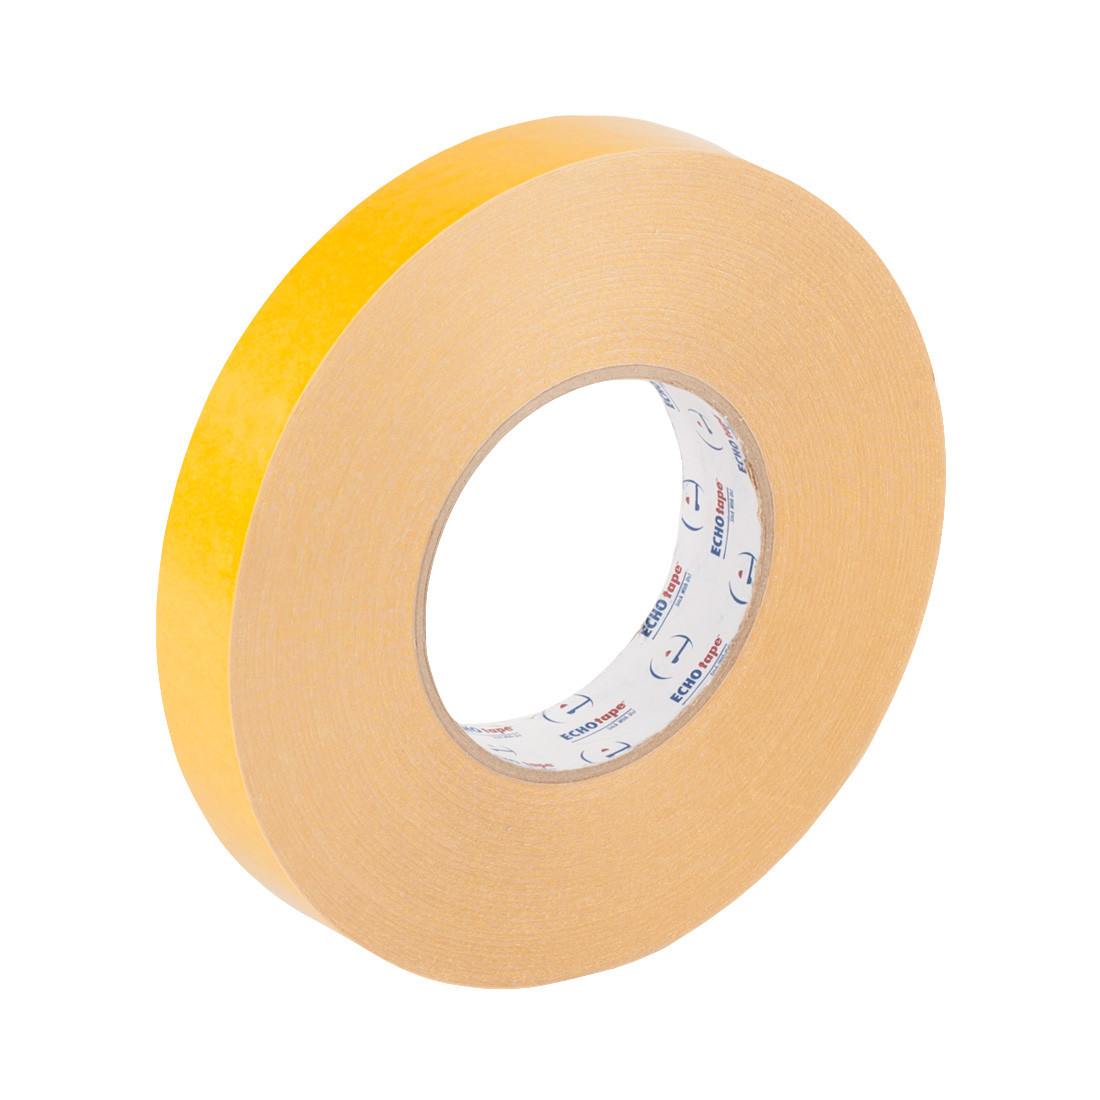 3M™ Gray 2-Sided Tape 7/8